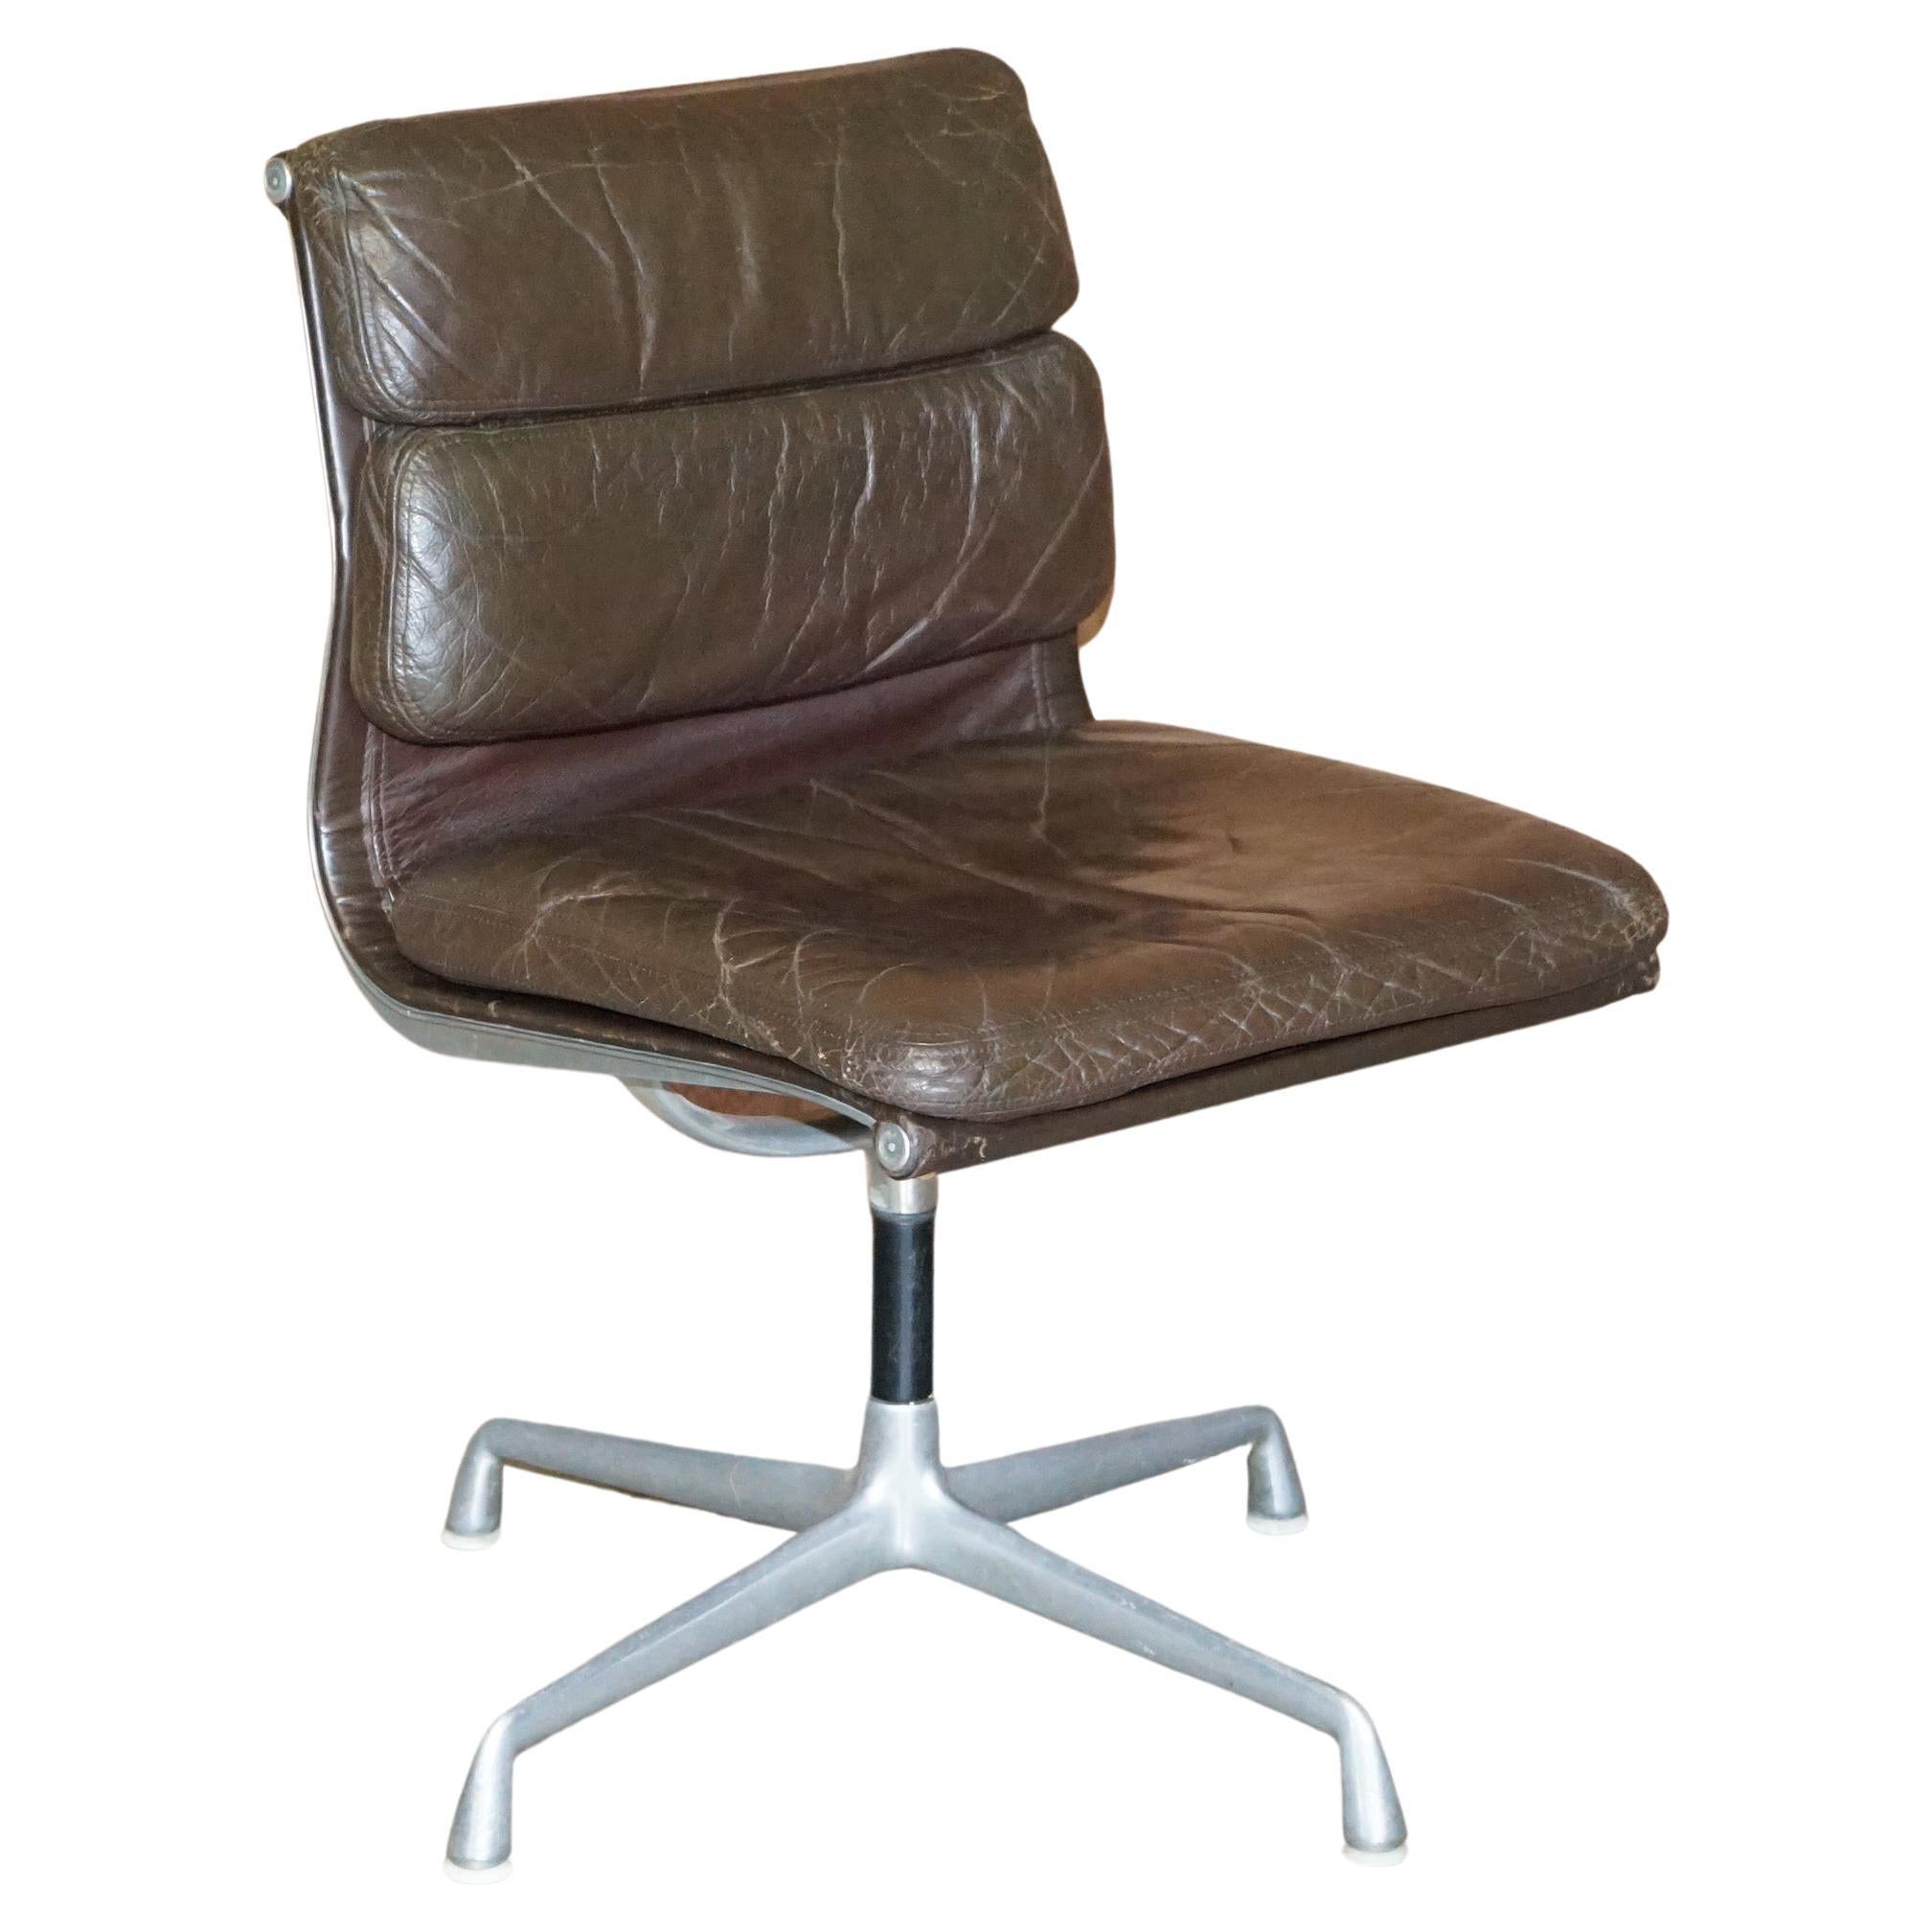 1970 Vitra Eames Herman Miller EA 205 Brown Leather Soft Pad Swivel Office Chair